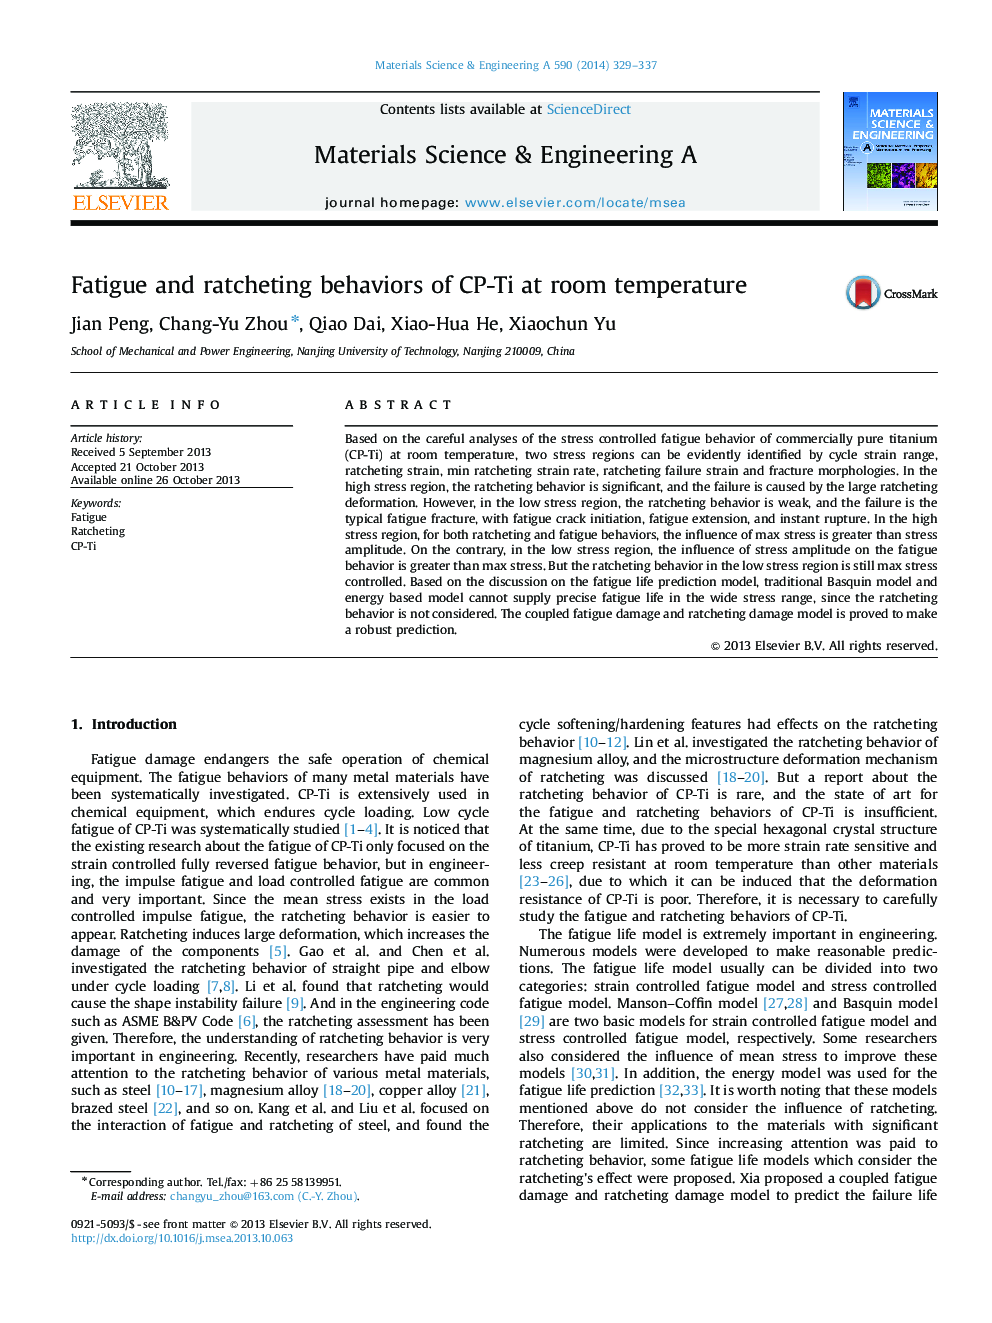 Fatigue and ratcheting behaviors of CP-Ti at room temperature